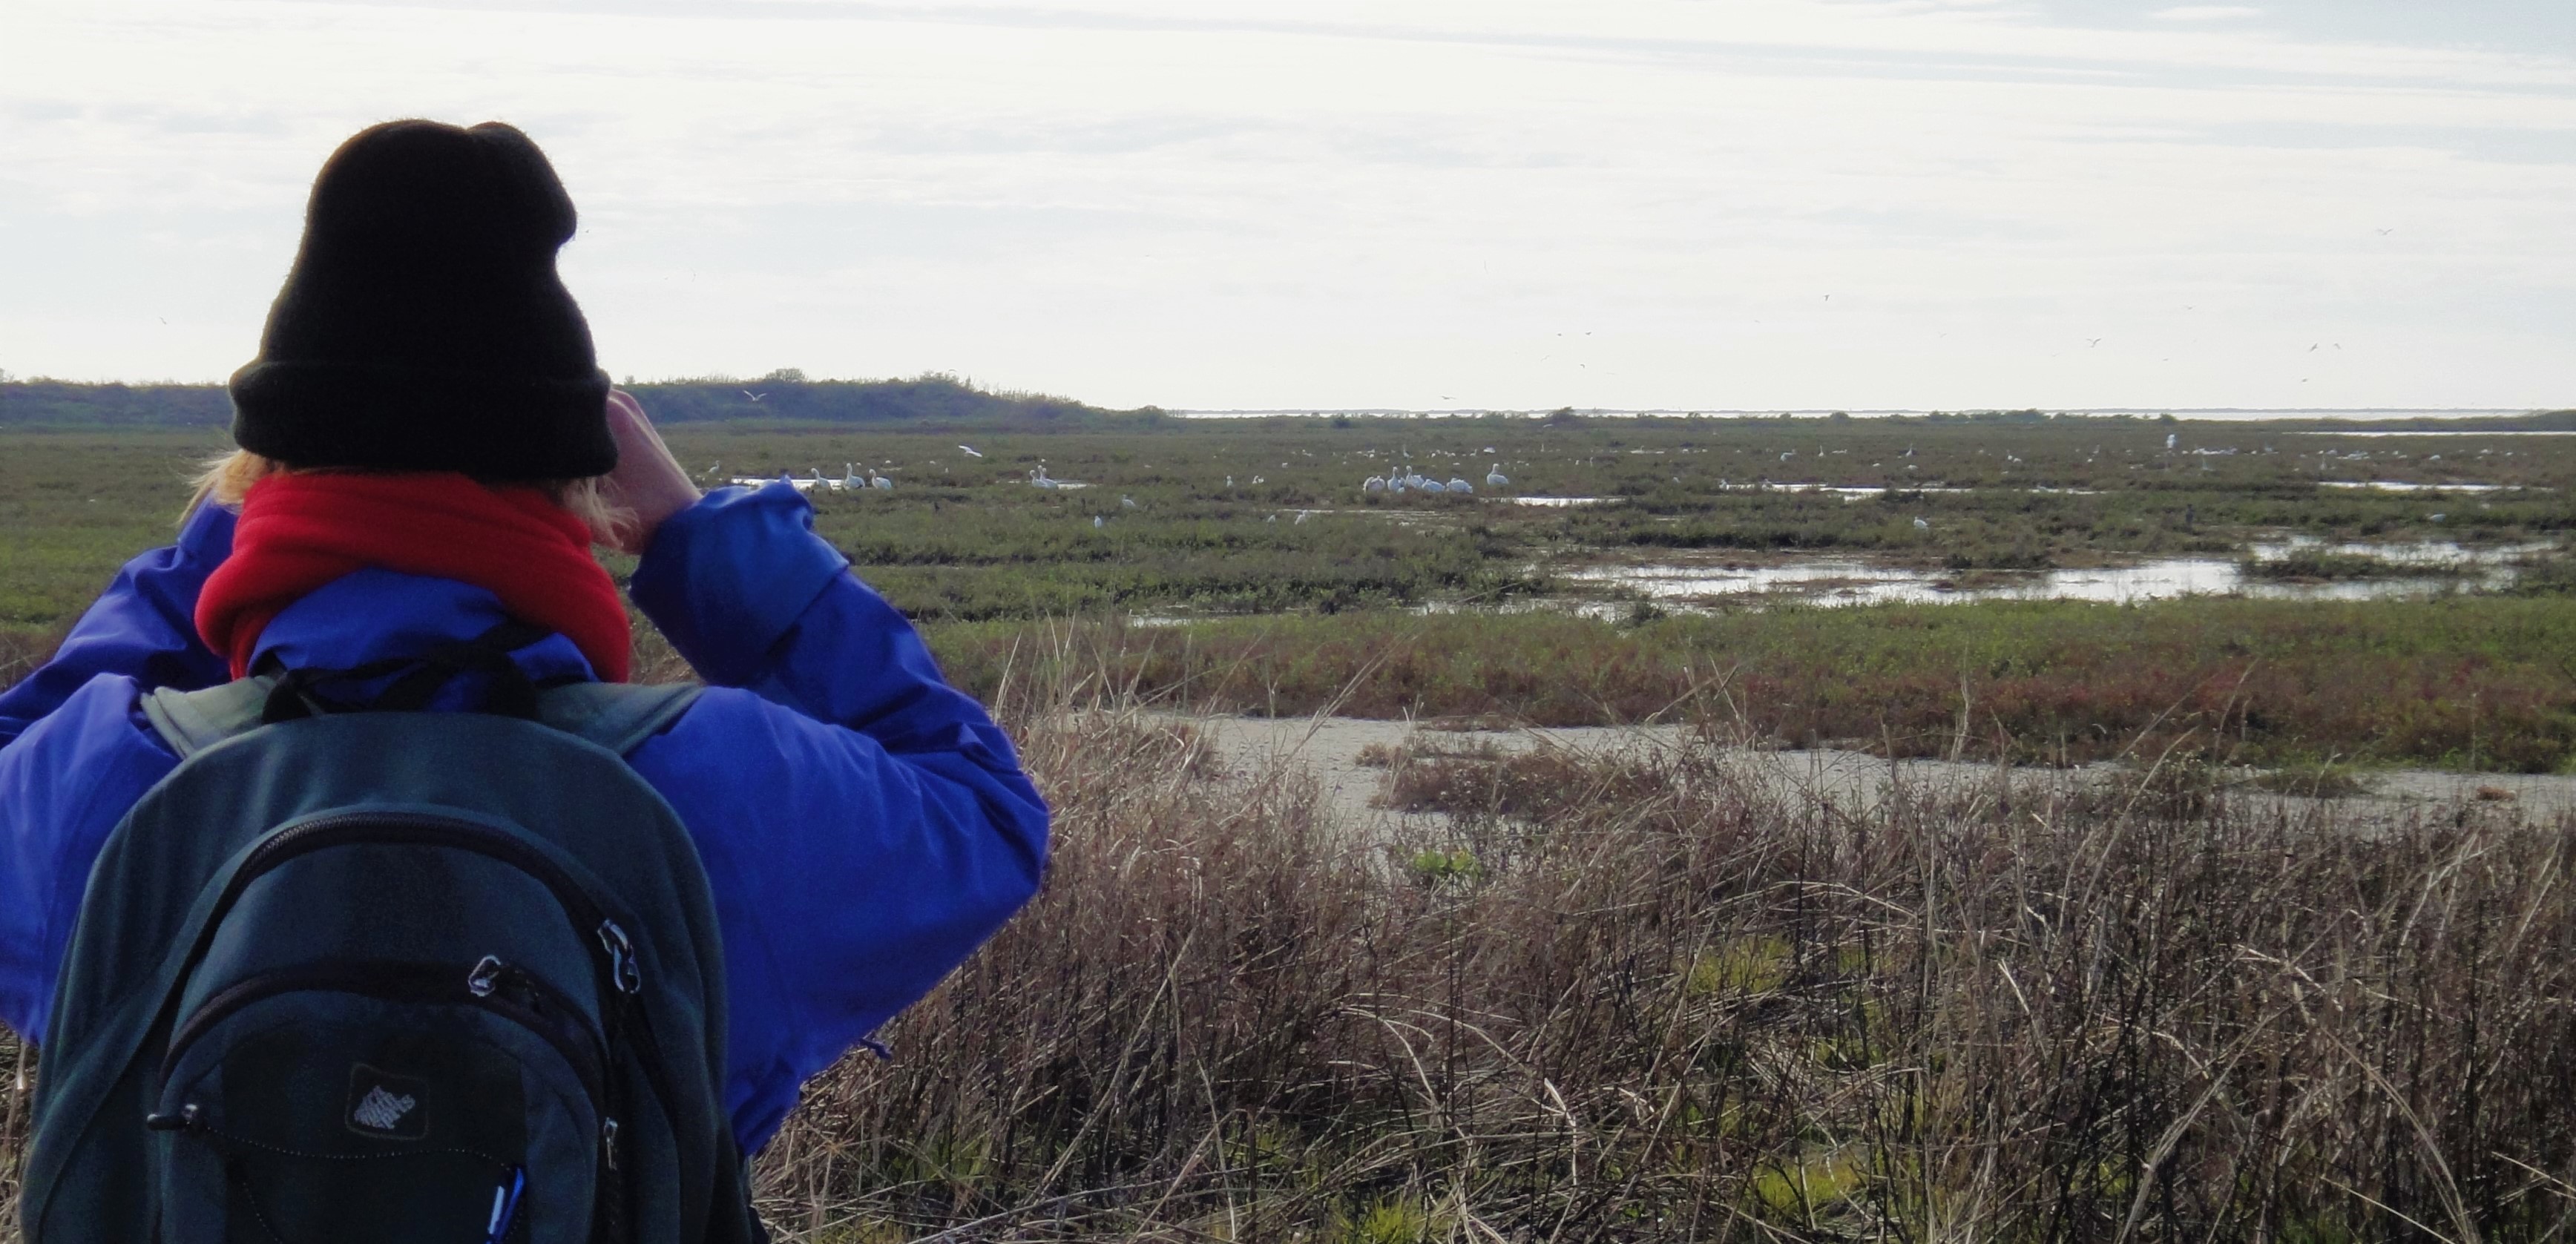 Observing whooping cranes